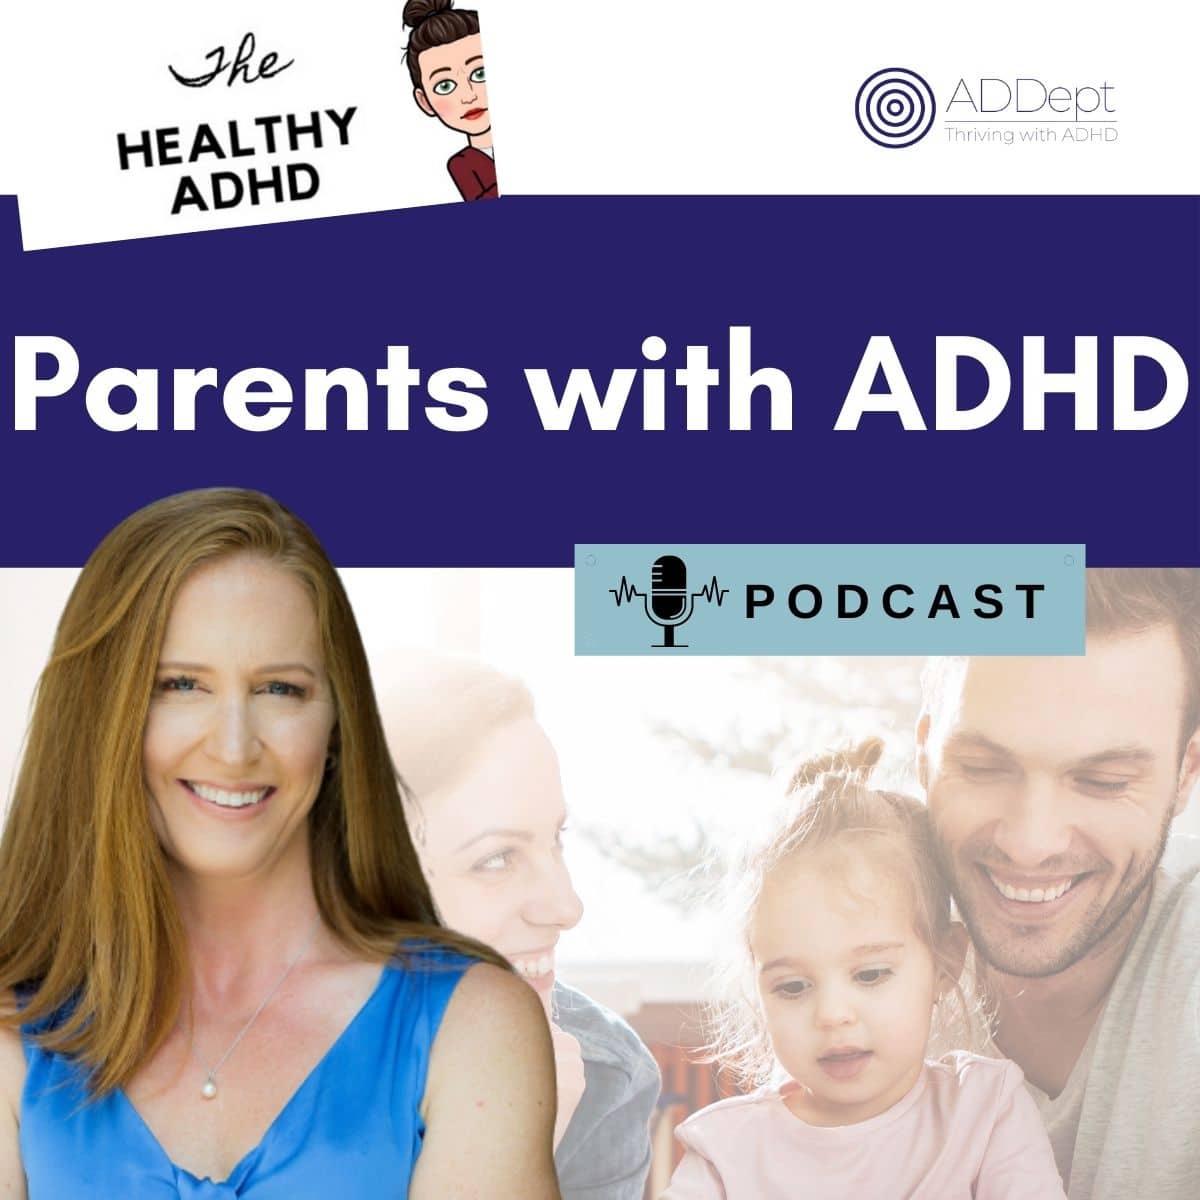 The Healthy ADHD Podcast - Parents with ADHD